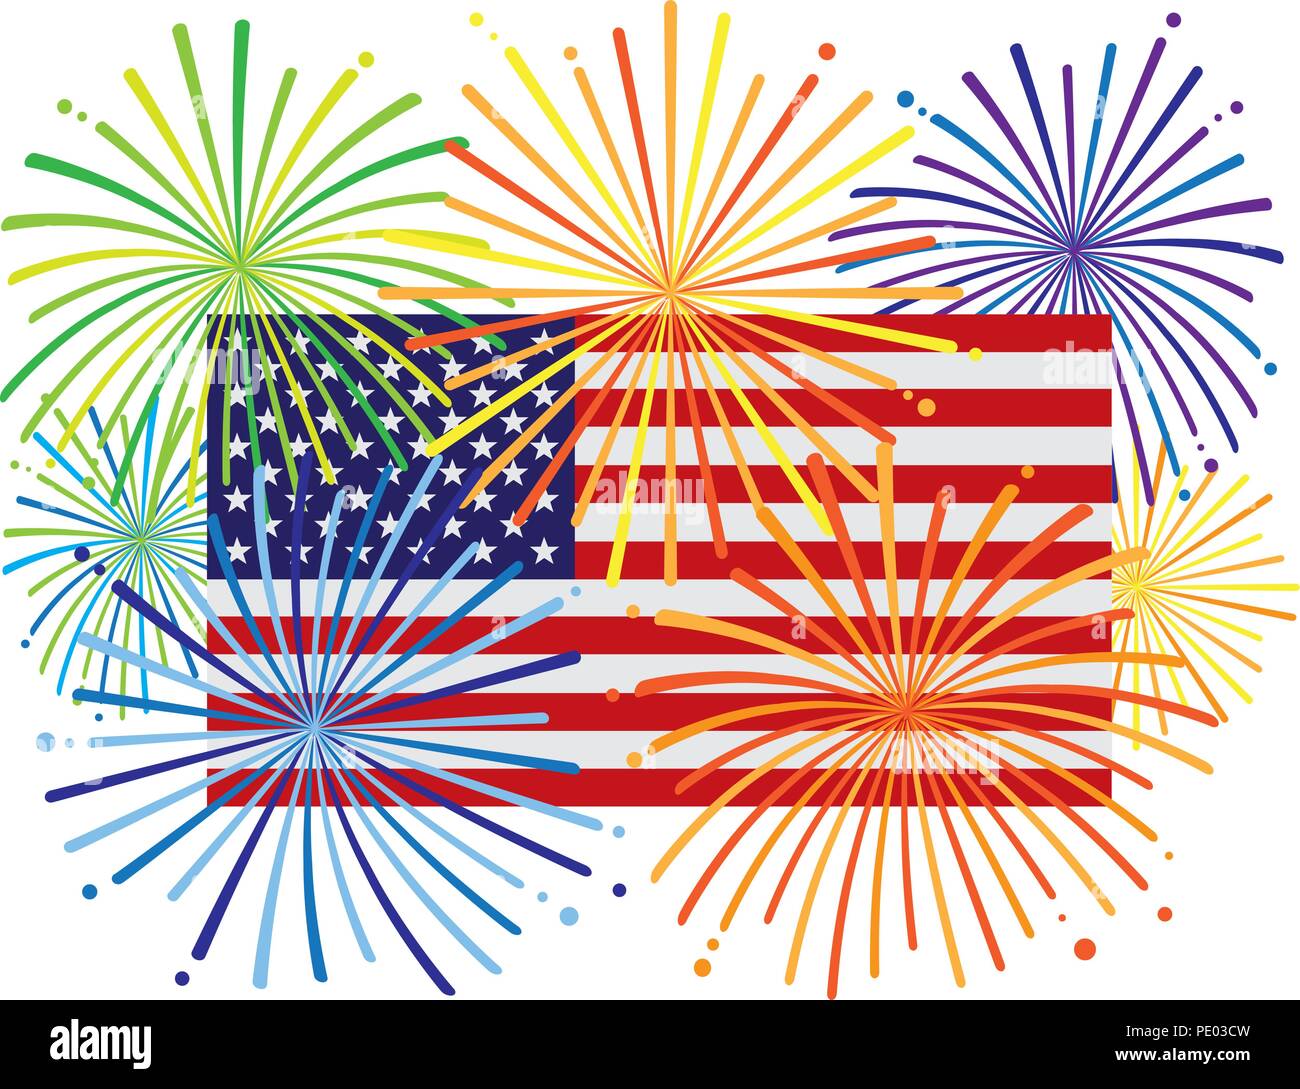 Fireworks display over USA American Flag for New Year or 4th July Independence Day celebration color illustration Stock Vector